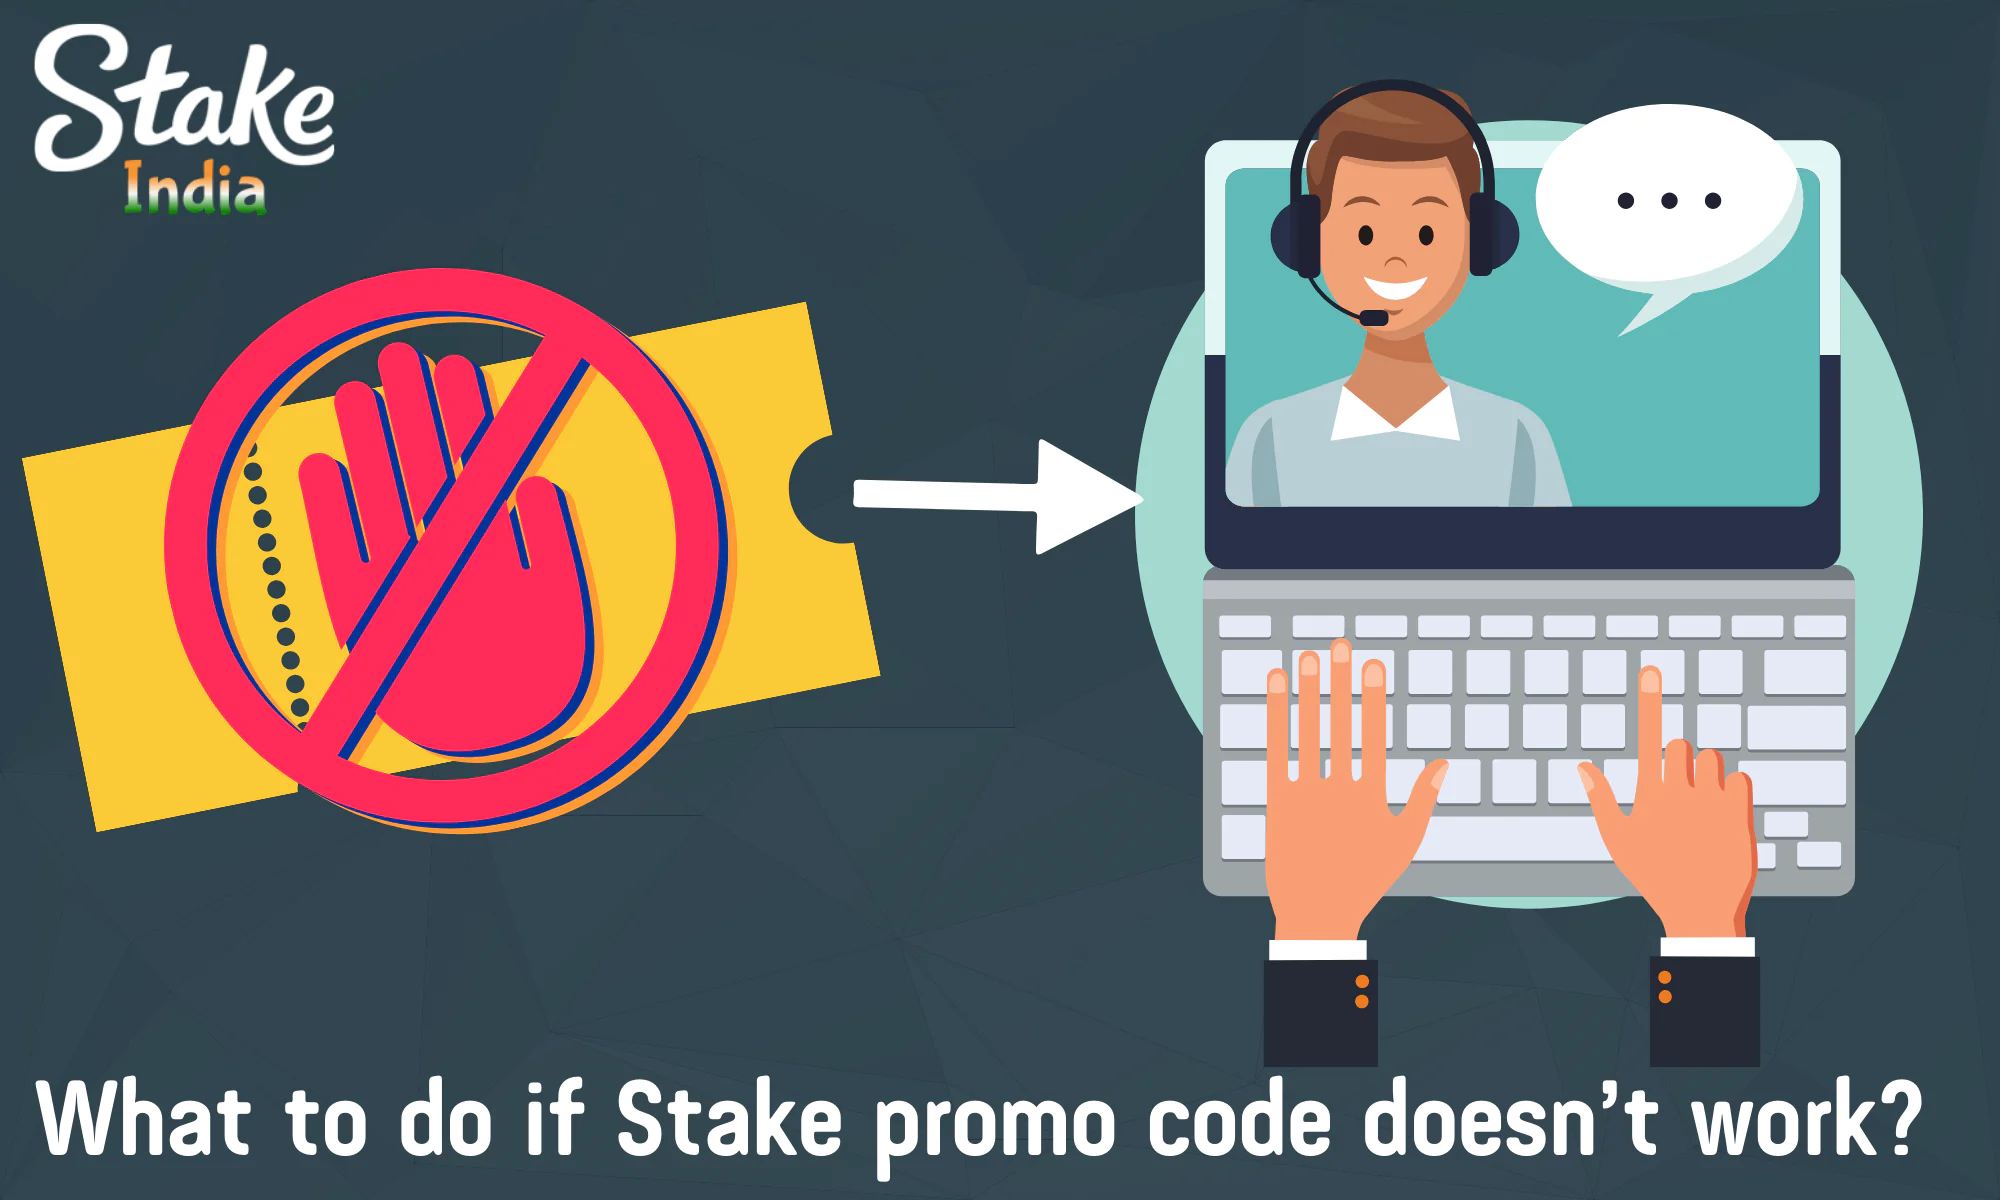 If the Stake bonus code did not work, you need to contact technical support